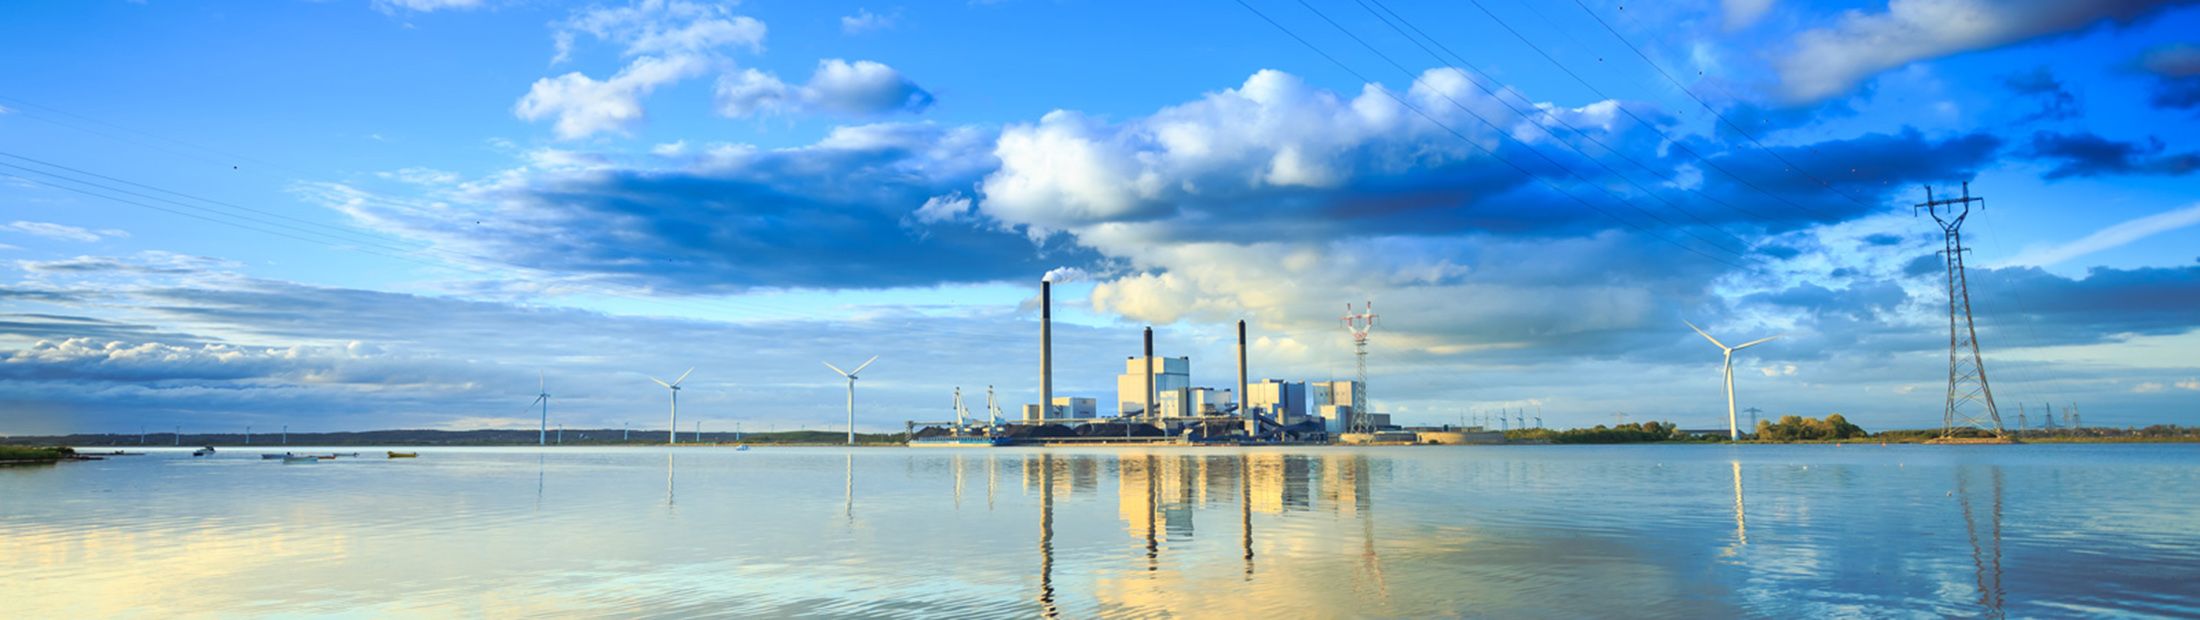 Buildings, wind turbines, and power lines in the distance reflected on a large body of water.